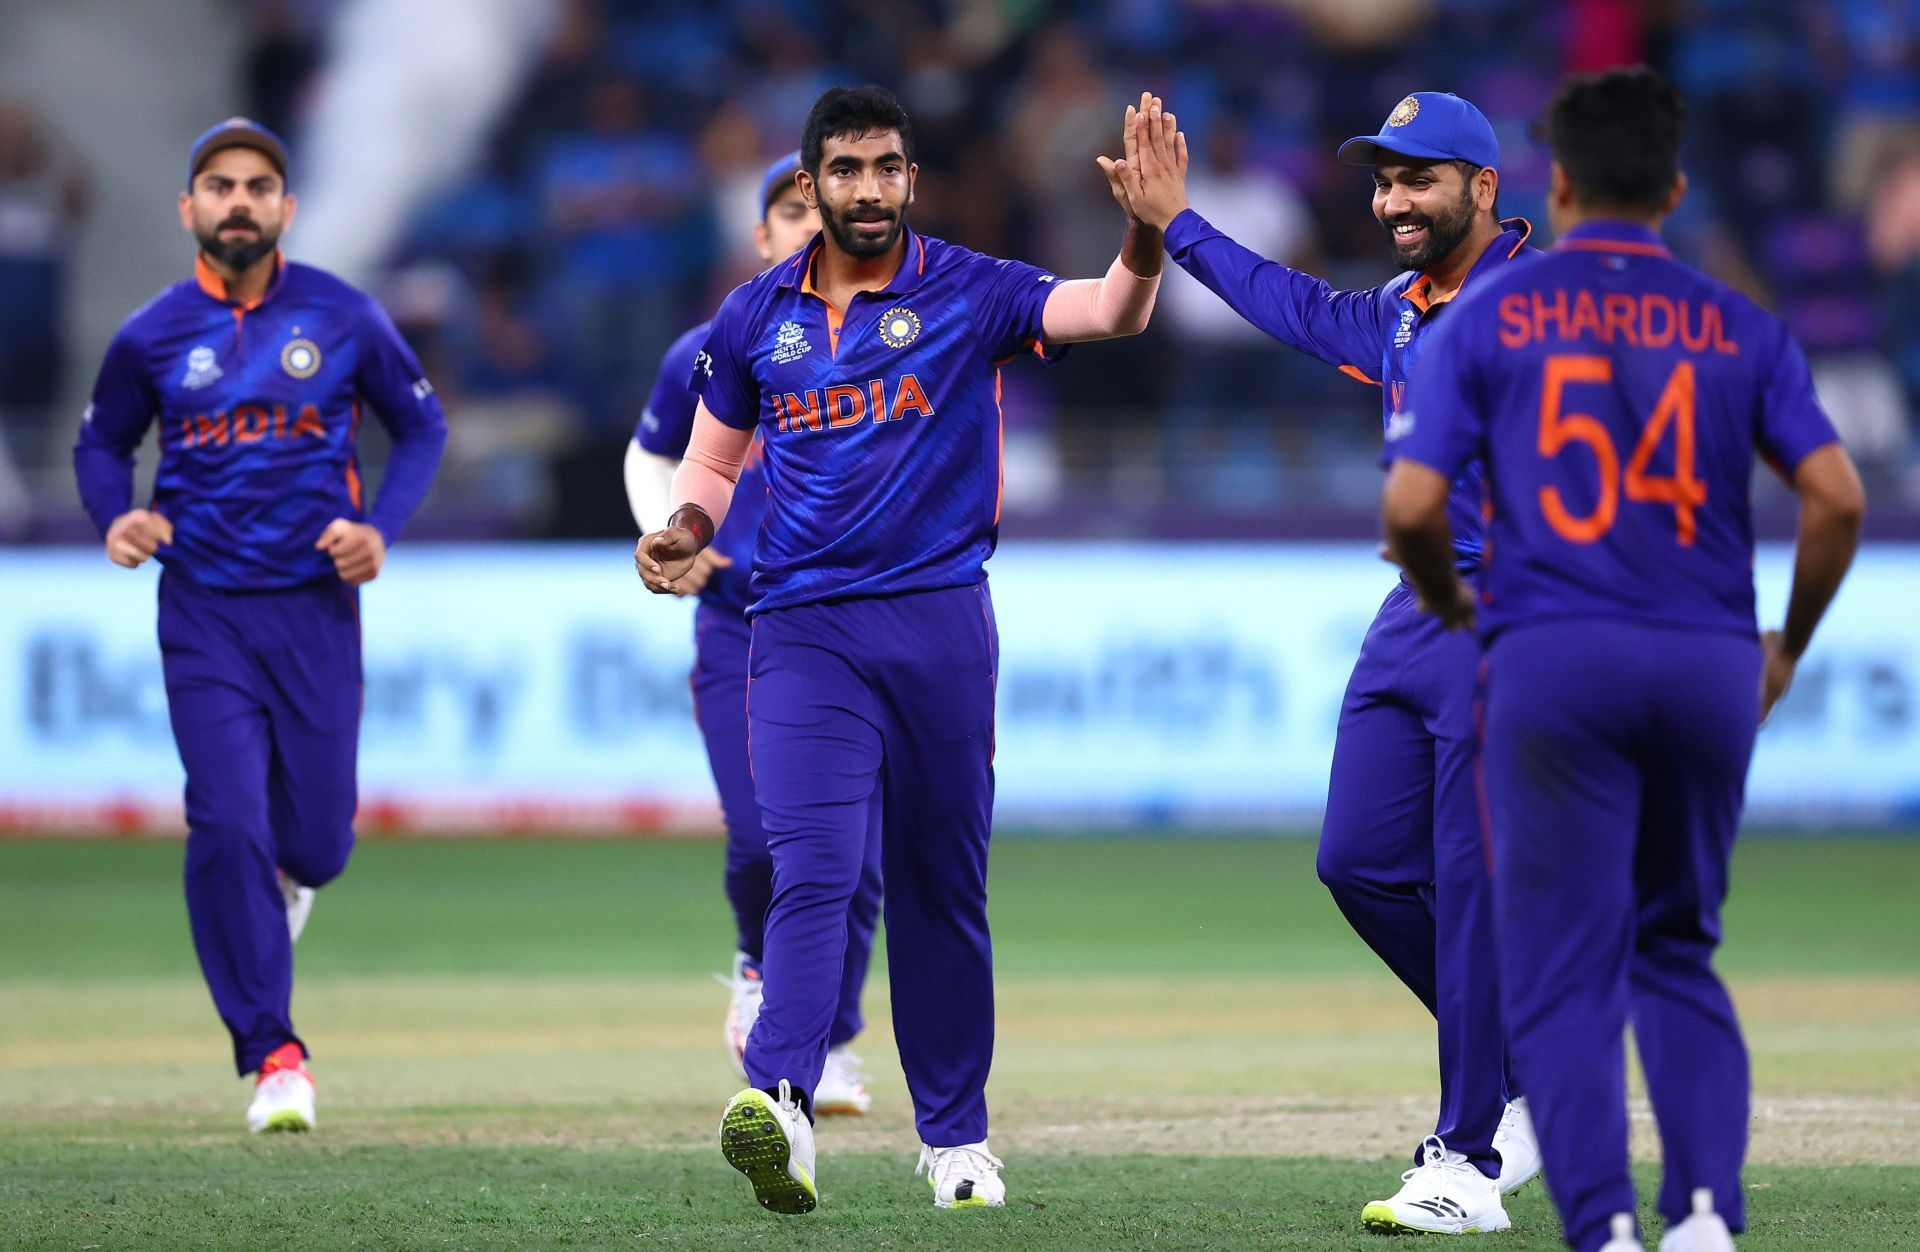 Jasprit Bumrah has accounted for both wickets that India have taken in the tournament so far [Credits: BCCI]